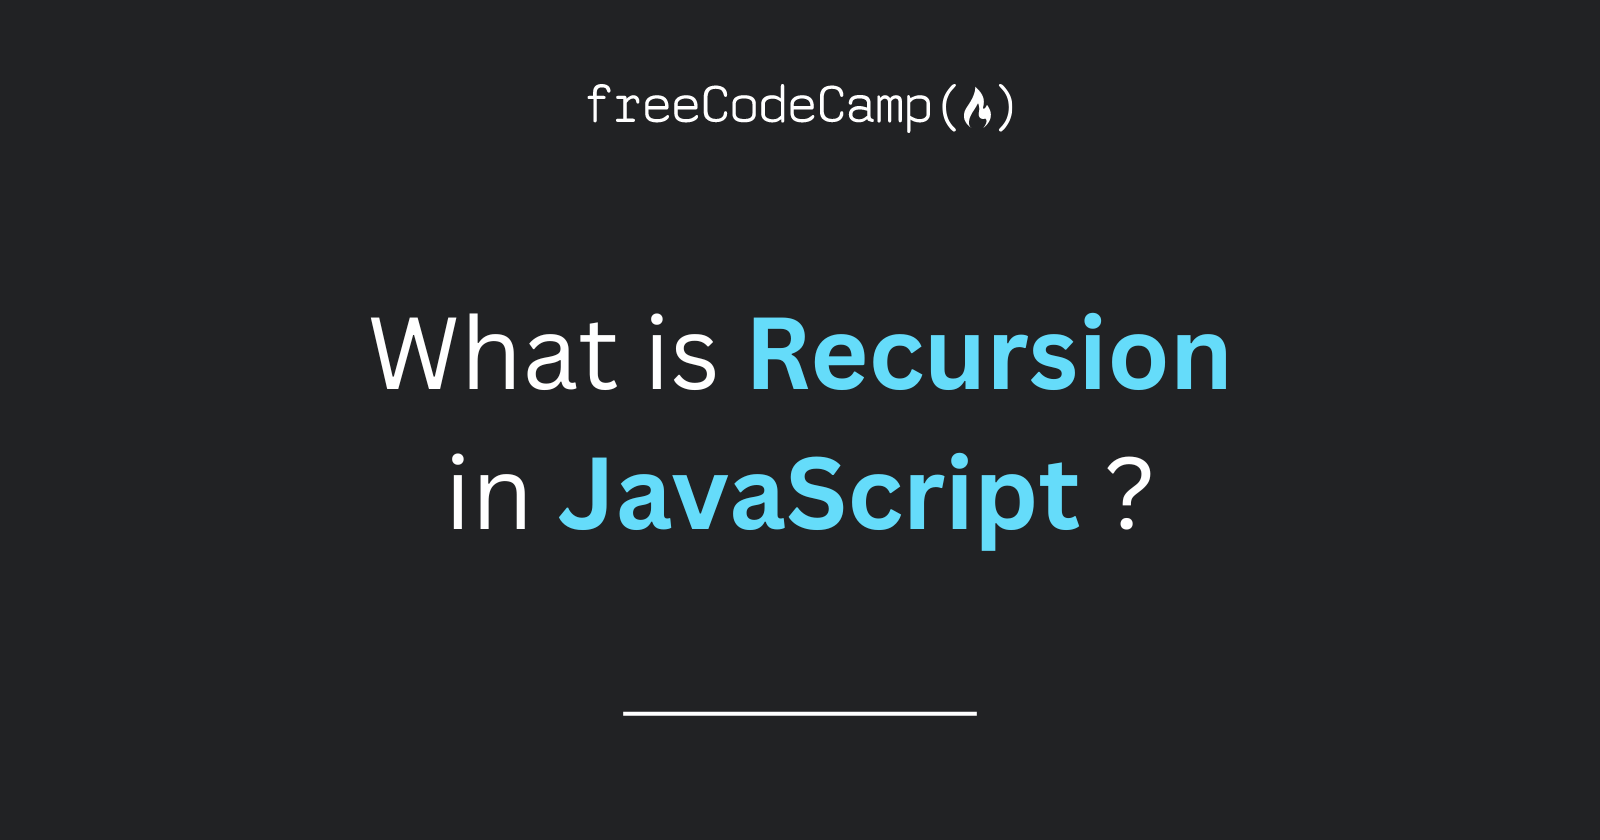 What is Recursion in JavaScript?